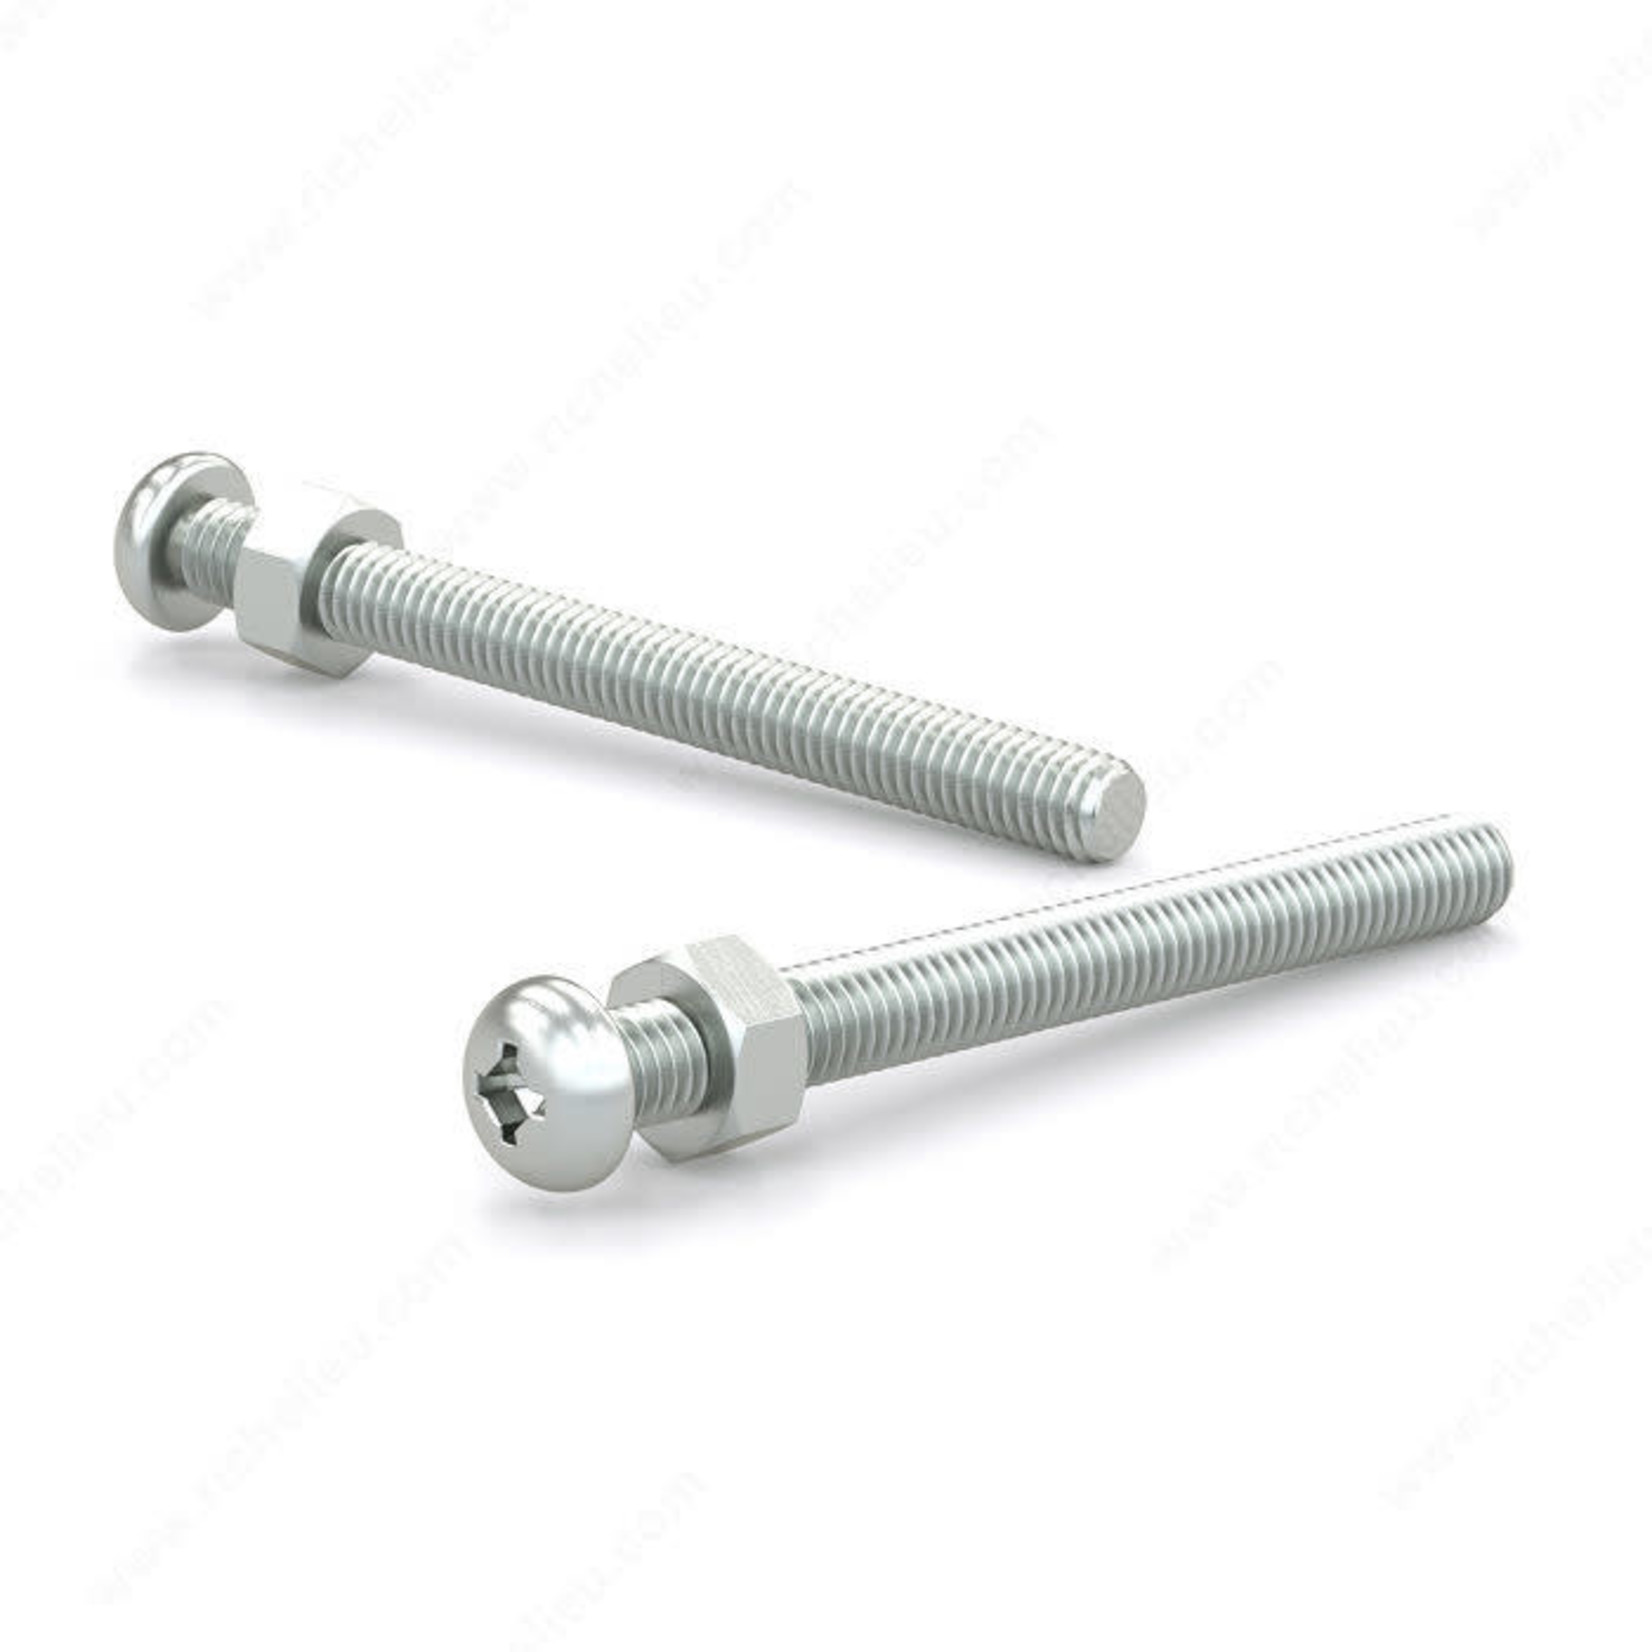 RELIABLE MACHINE SCREW WITH NUT, PAN HEAD, 10-32 3IN, 6PK BLISTER